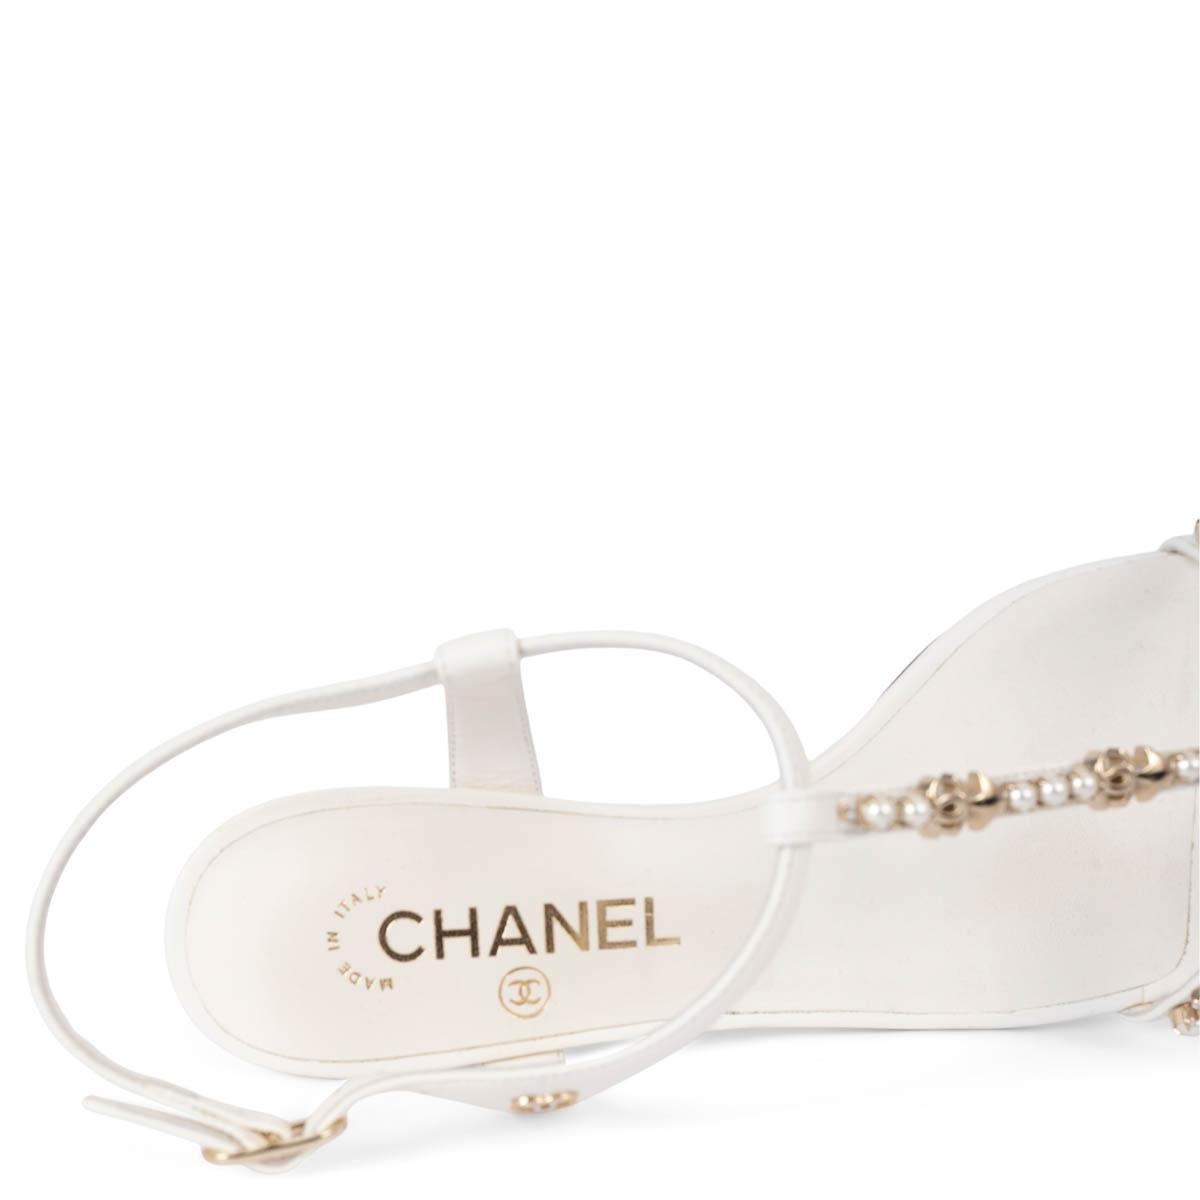 CHANEL white leather 2020 20S PEARL T-STRAP Sandals Shoes 38.5 4